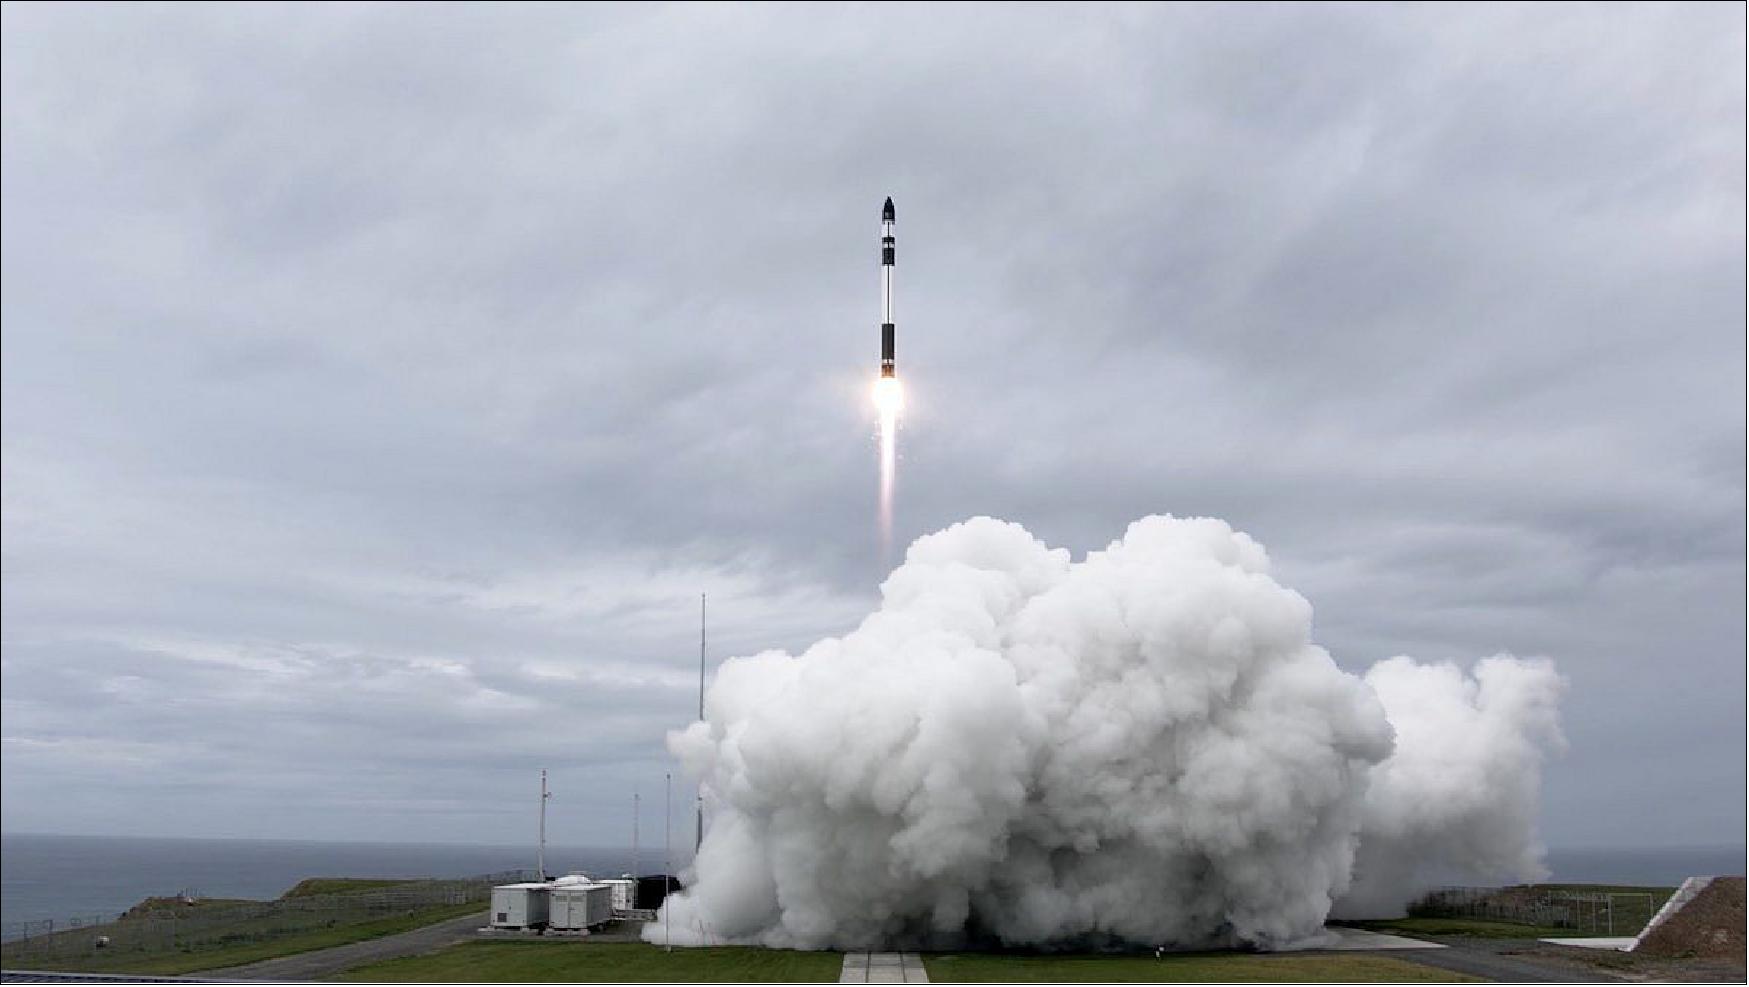 Figure 44: An Electron rocket lifts off from Rocket Lab’s launch base in New Zealand with 10 small satellites for Planet and Canon (image credit: Rocket Lab)